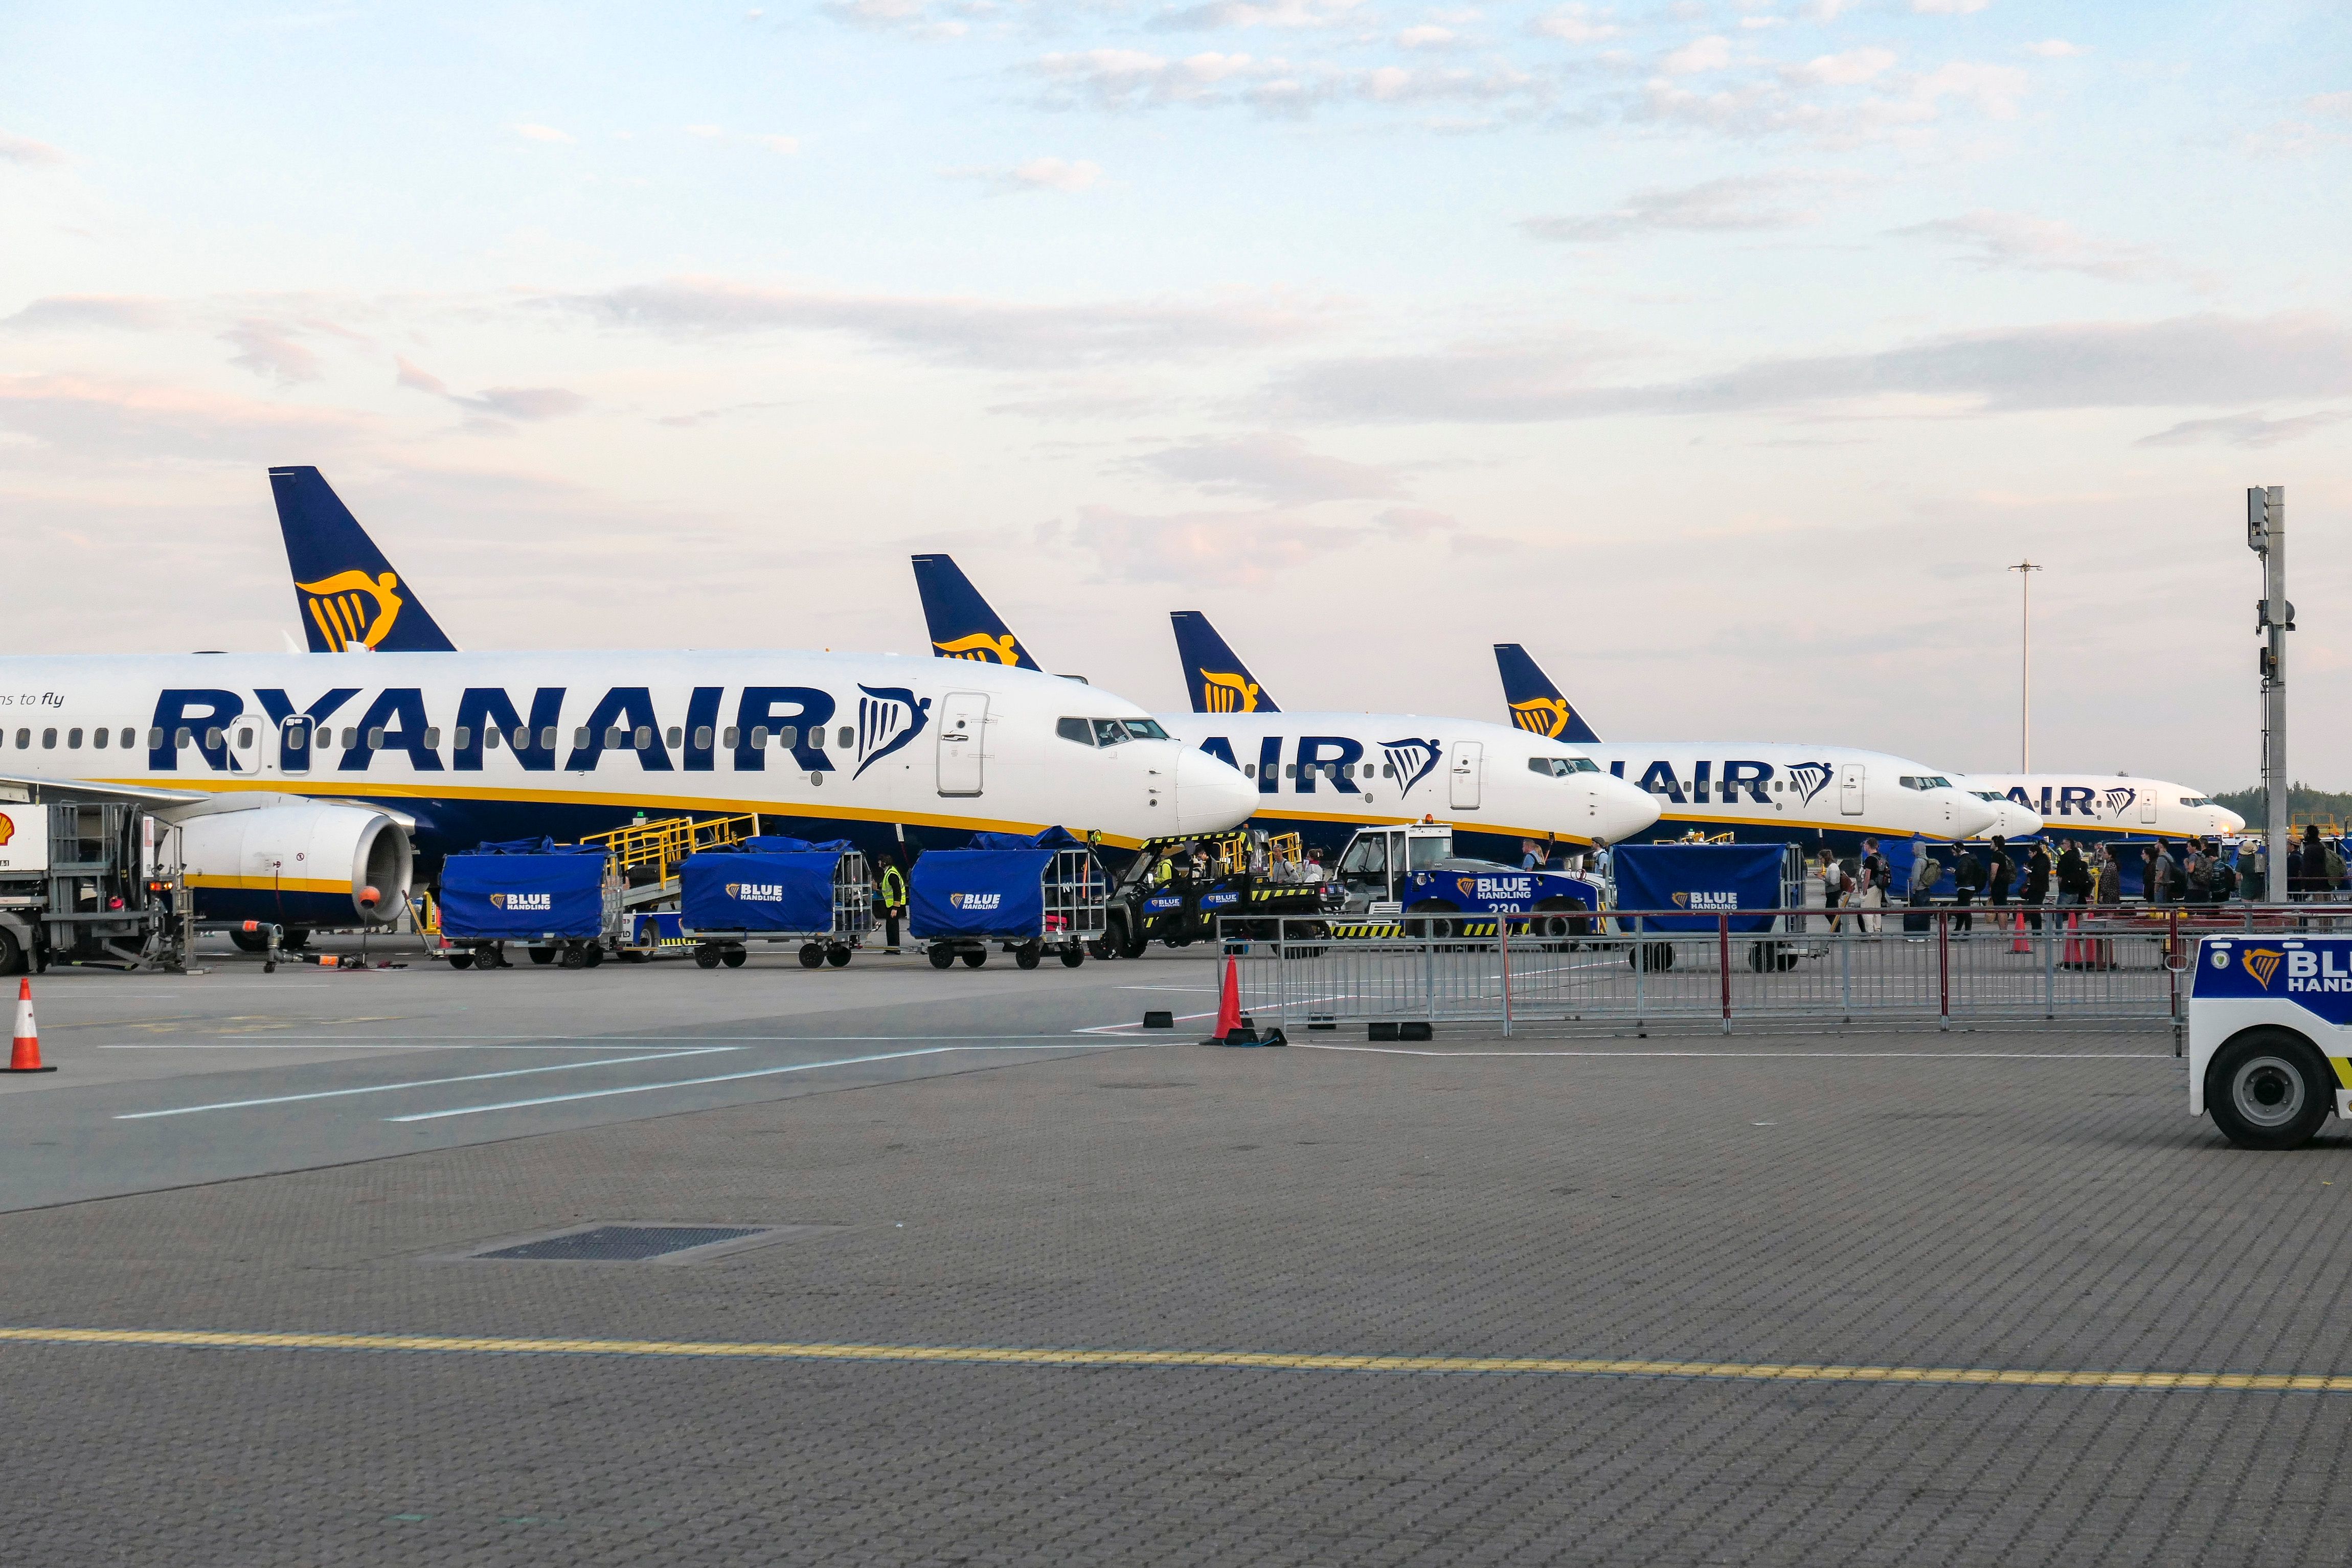 Ryanair Boeing 737-800 aircraft at London Stansted Airport STN shutterstock_1471948592